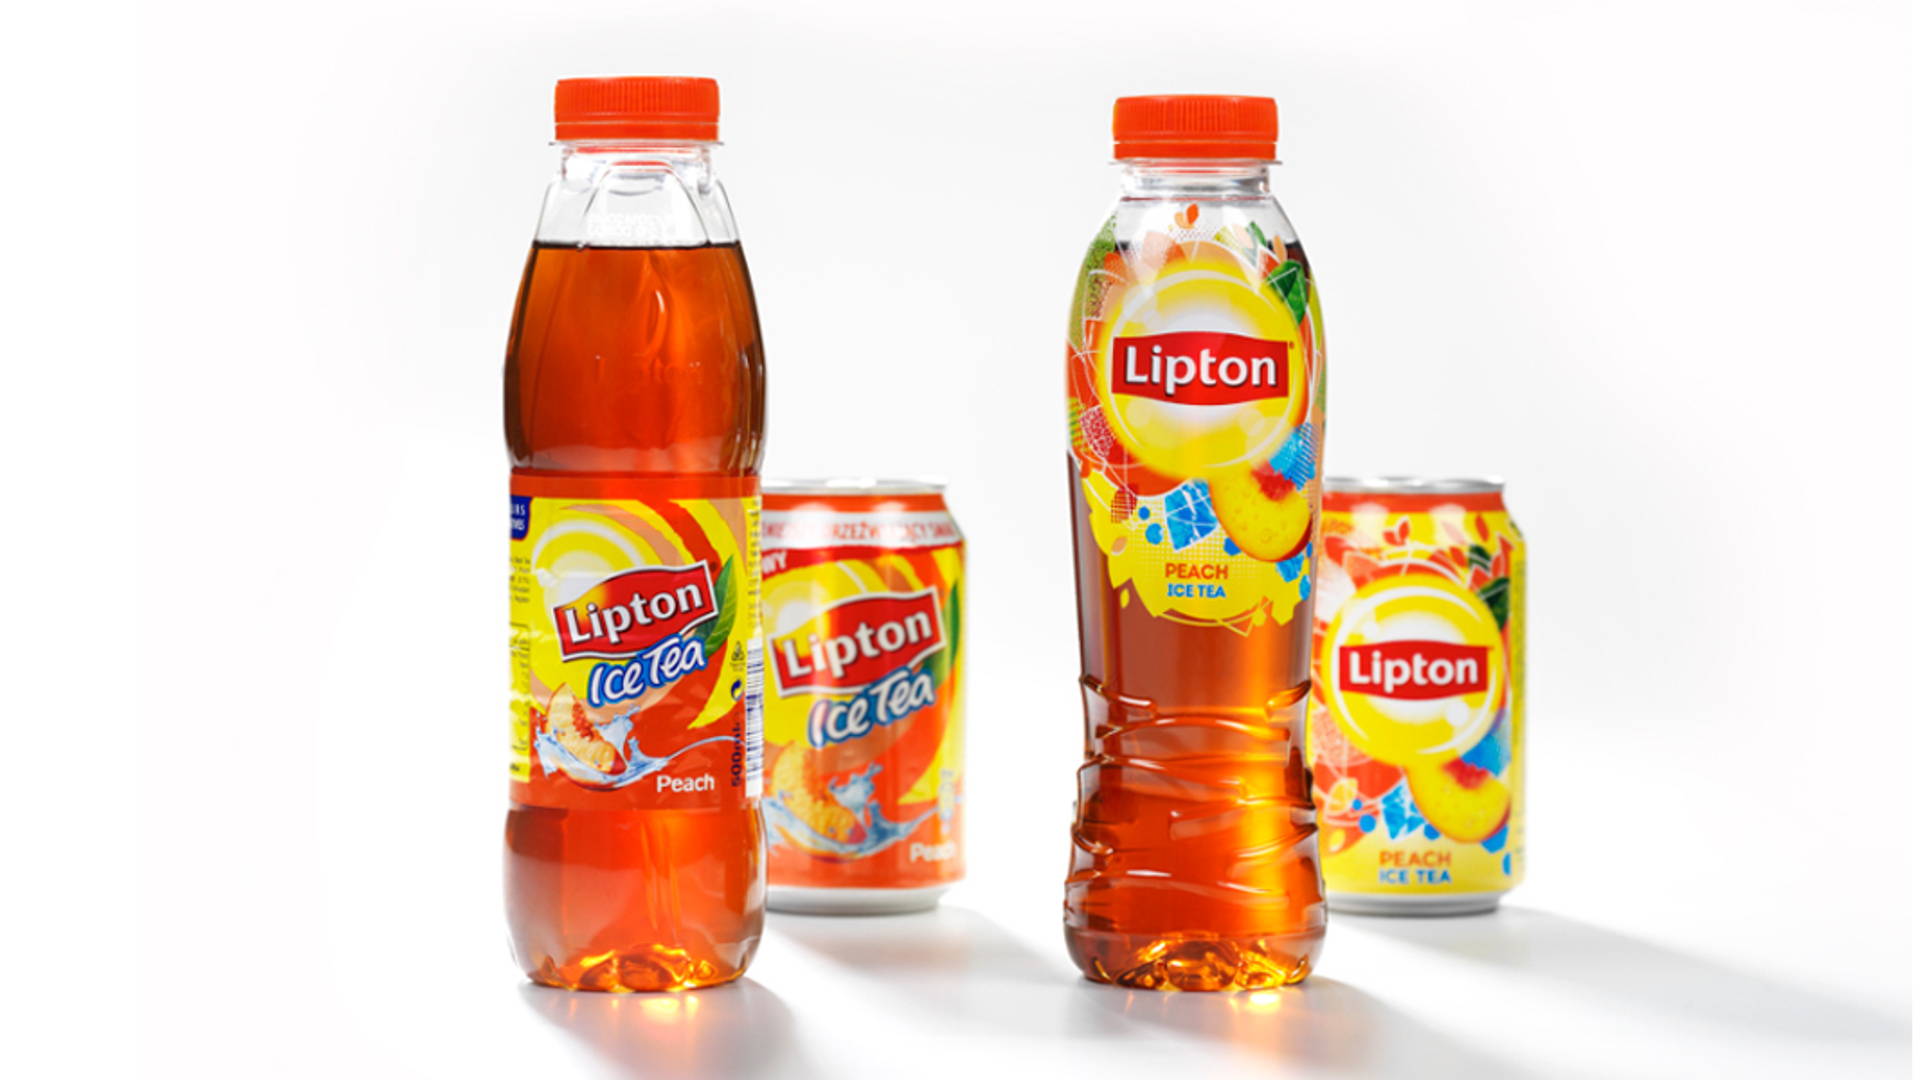 Featured image for Before & After: Global re-design for Lipton Ice Tea